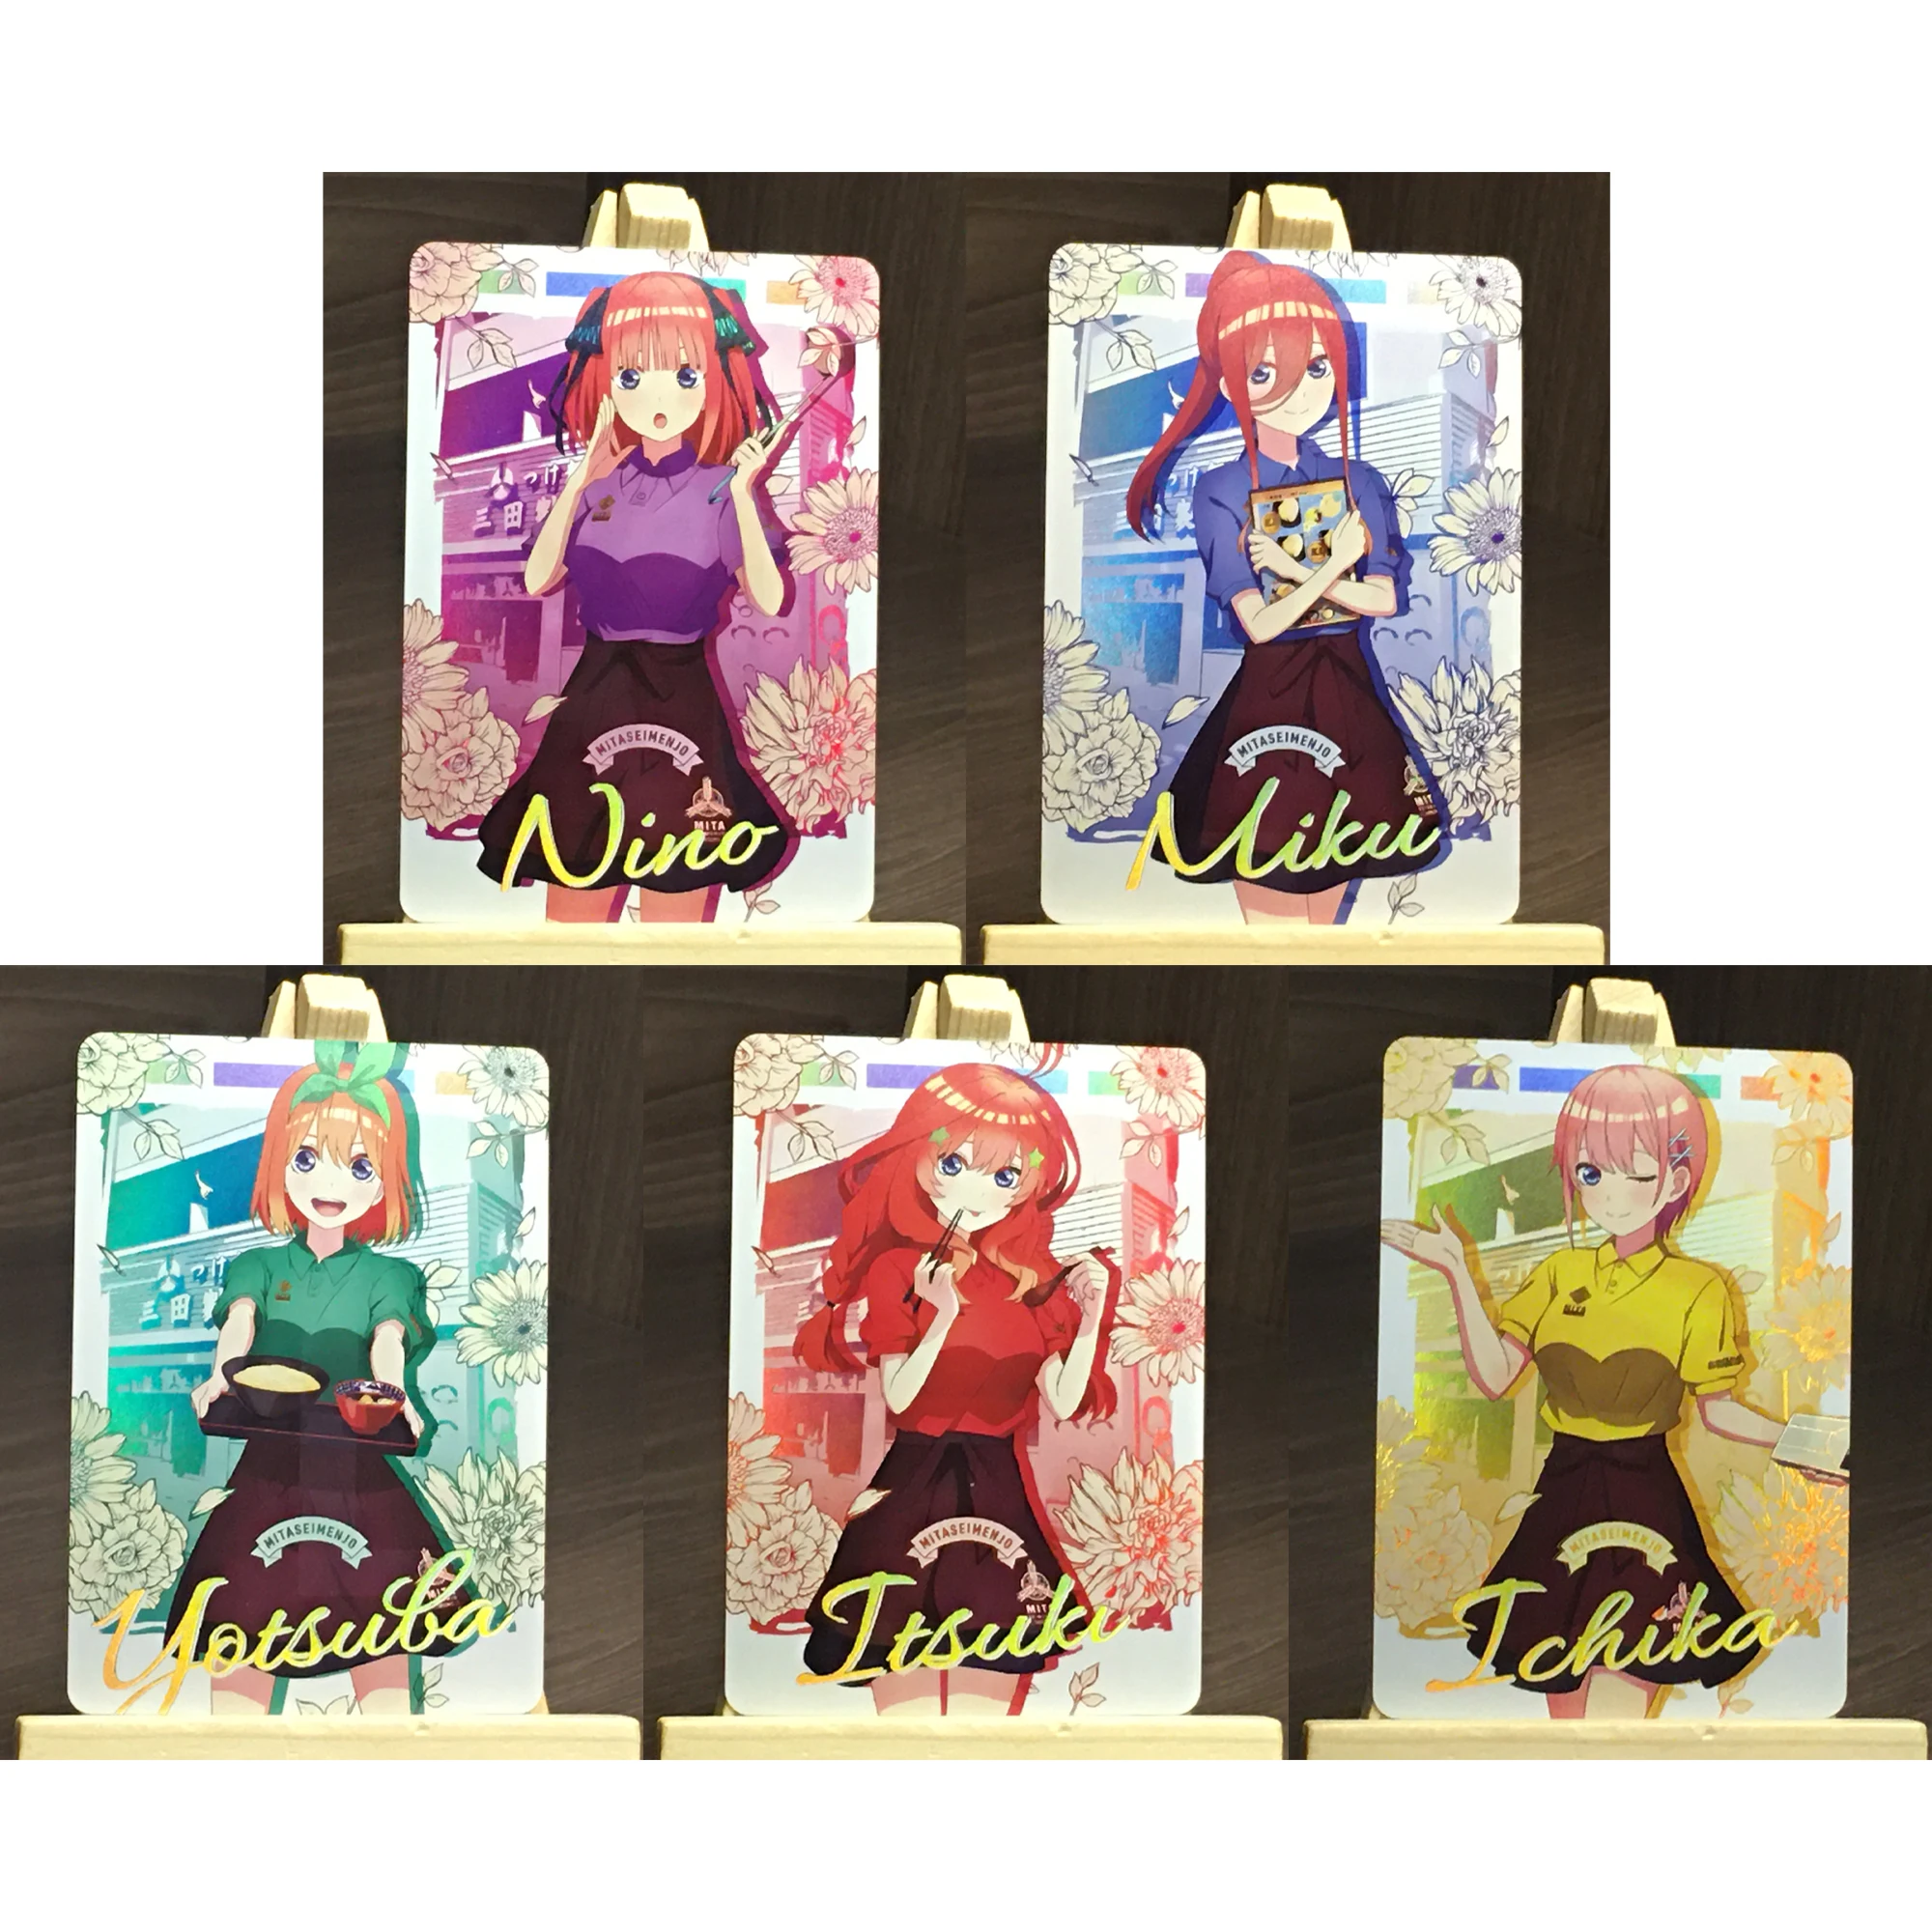 

5Pcs/set The Quintessential Quintuplets Laser Flash Card Nakano Ichika Nino Miku Classic Anime Game Collection Cards Gift Toys